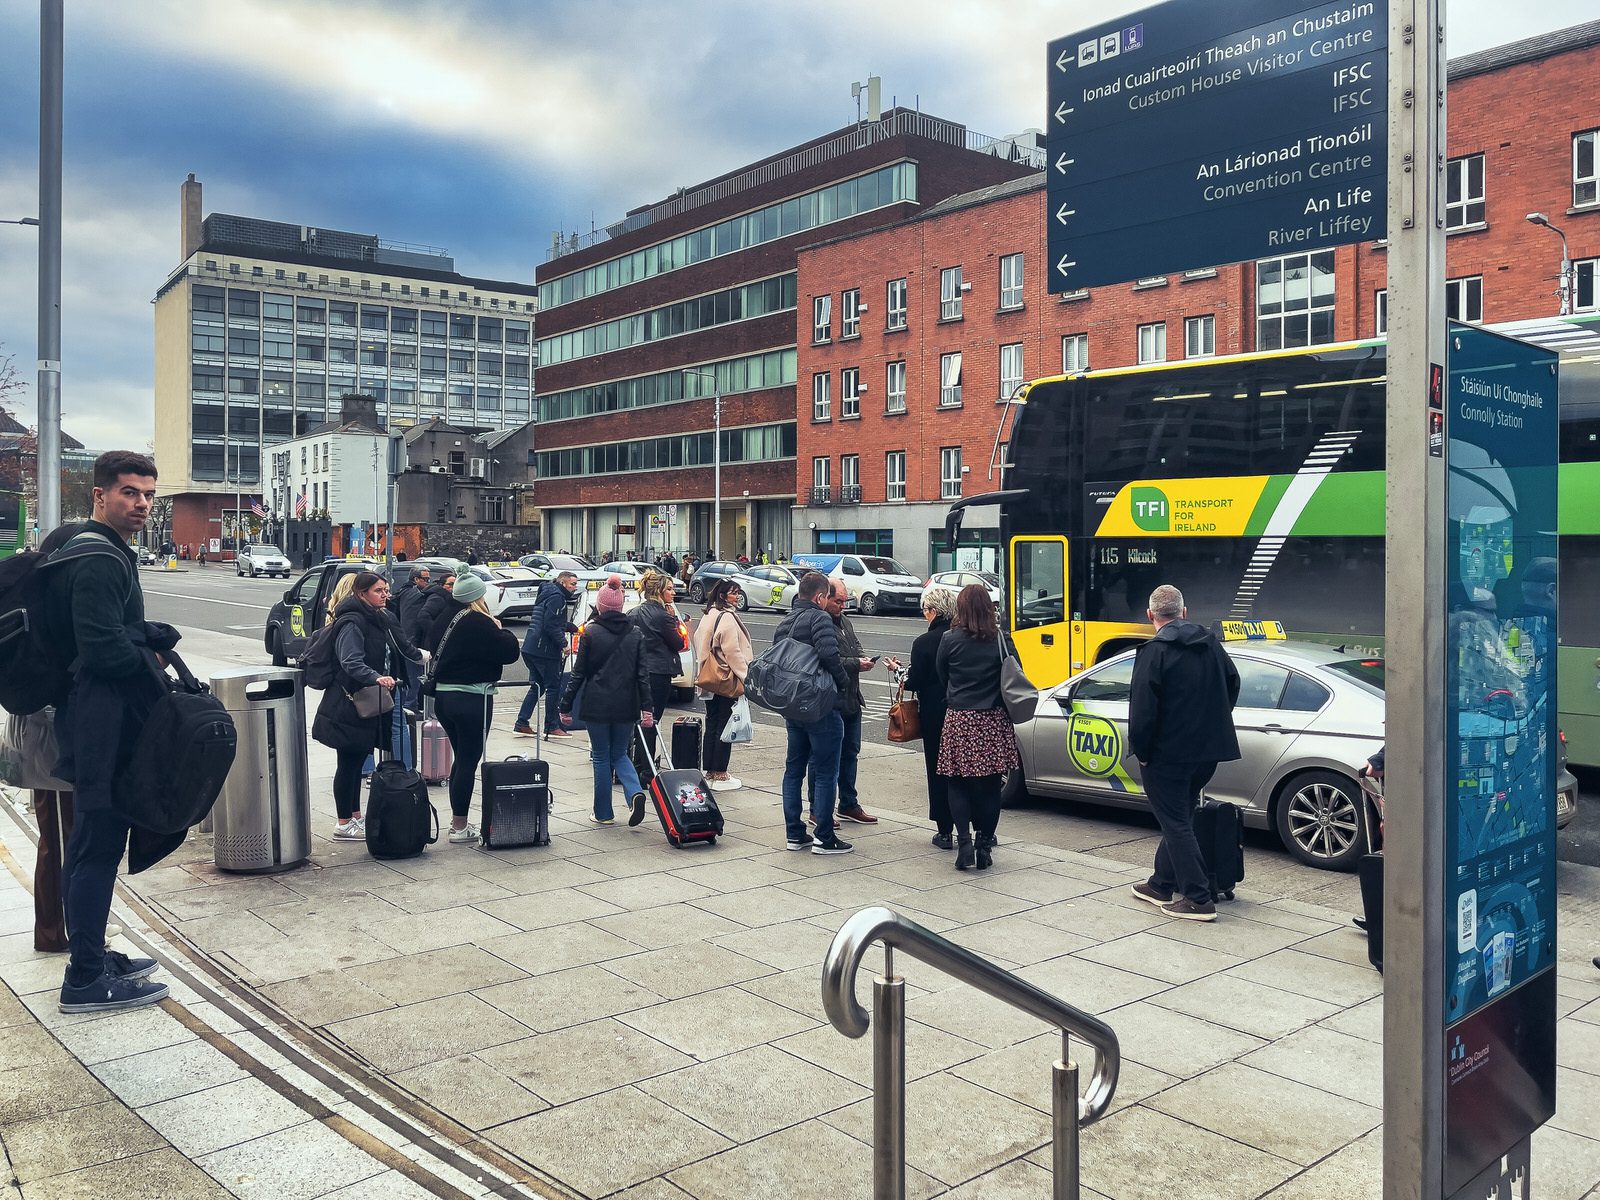 AS THE BUS AND TRAM SERVICES WERE SUSPENDED IN THE CITY CENTRE [I WENT TO CONNOLLY STATION AND TRAVELLED BY DART]-225383-1